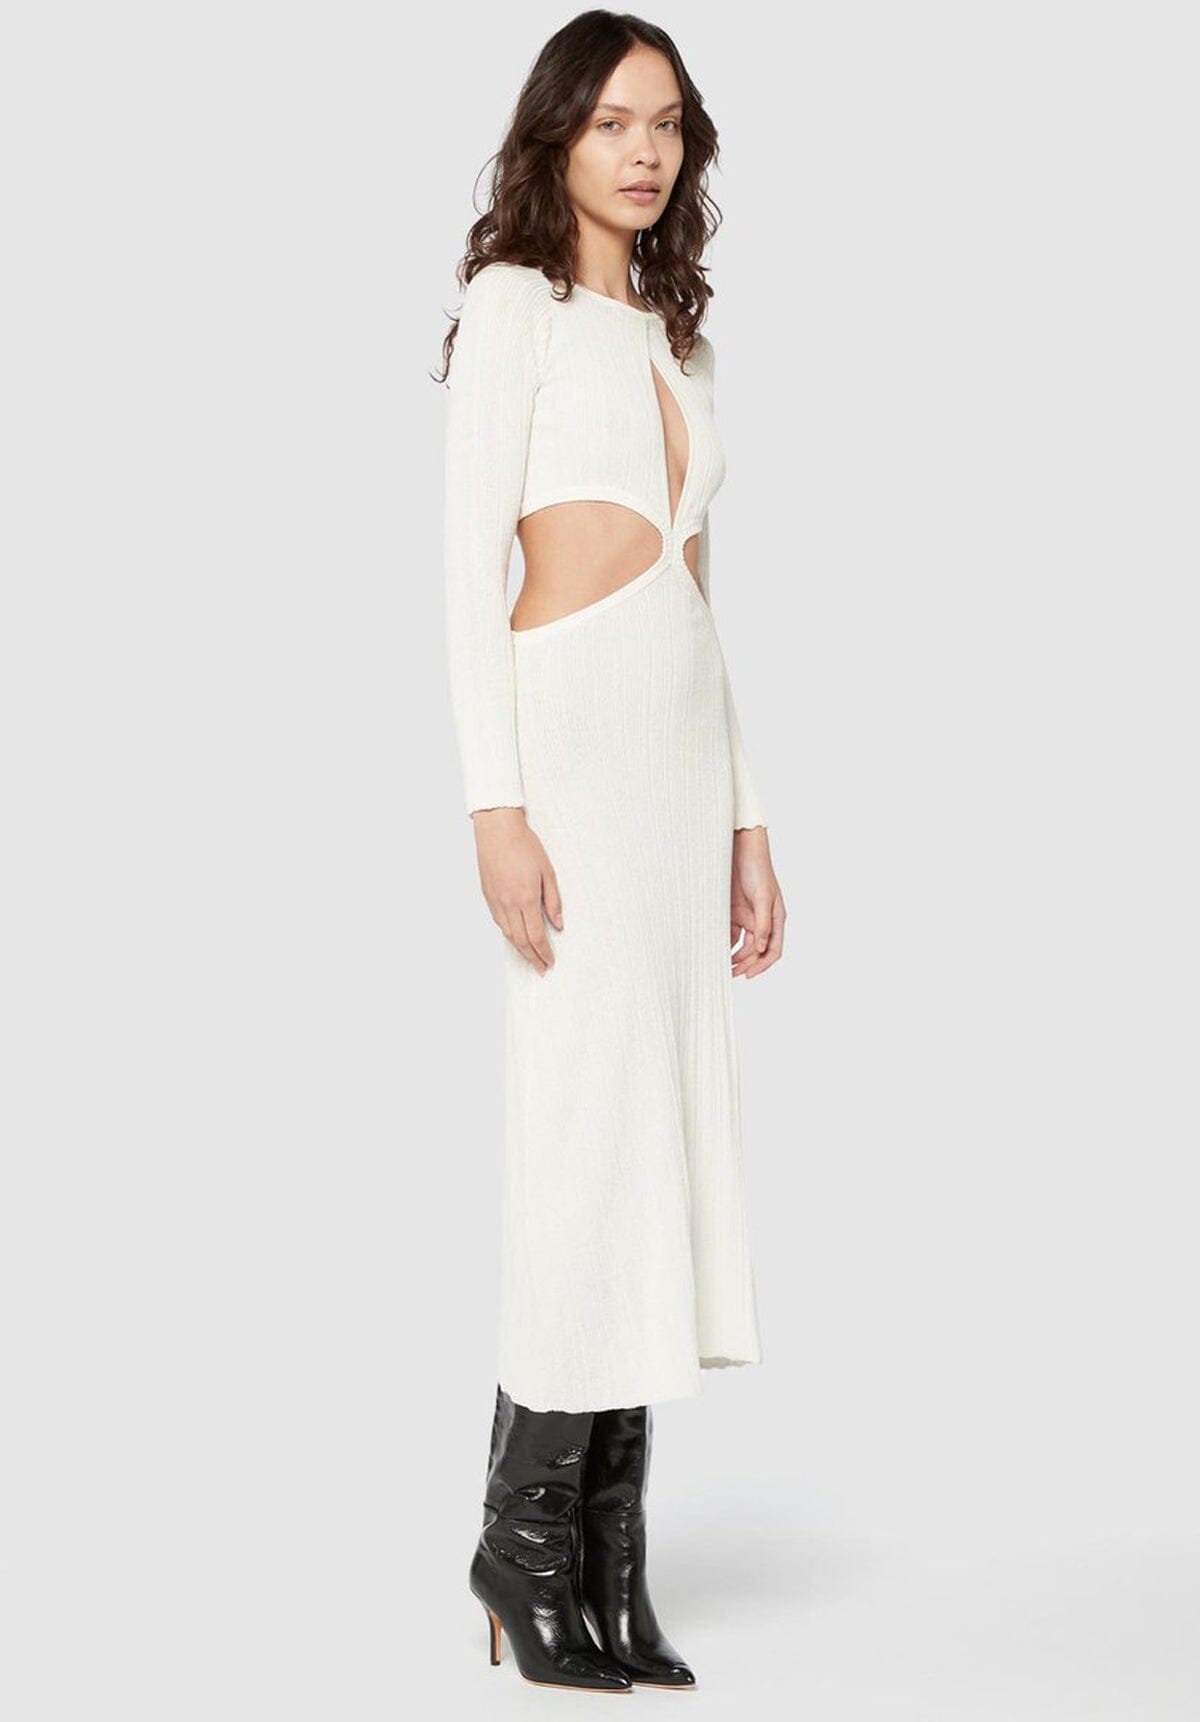 New Dimensions Cut Out Knit Dress - White Clothing Manning Cartell 